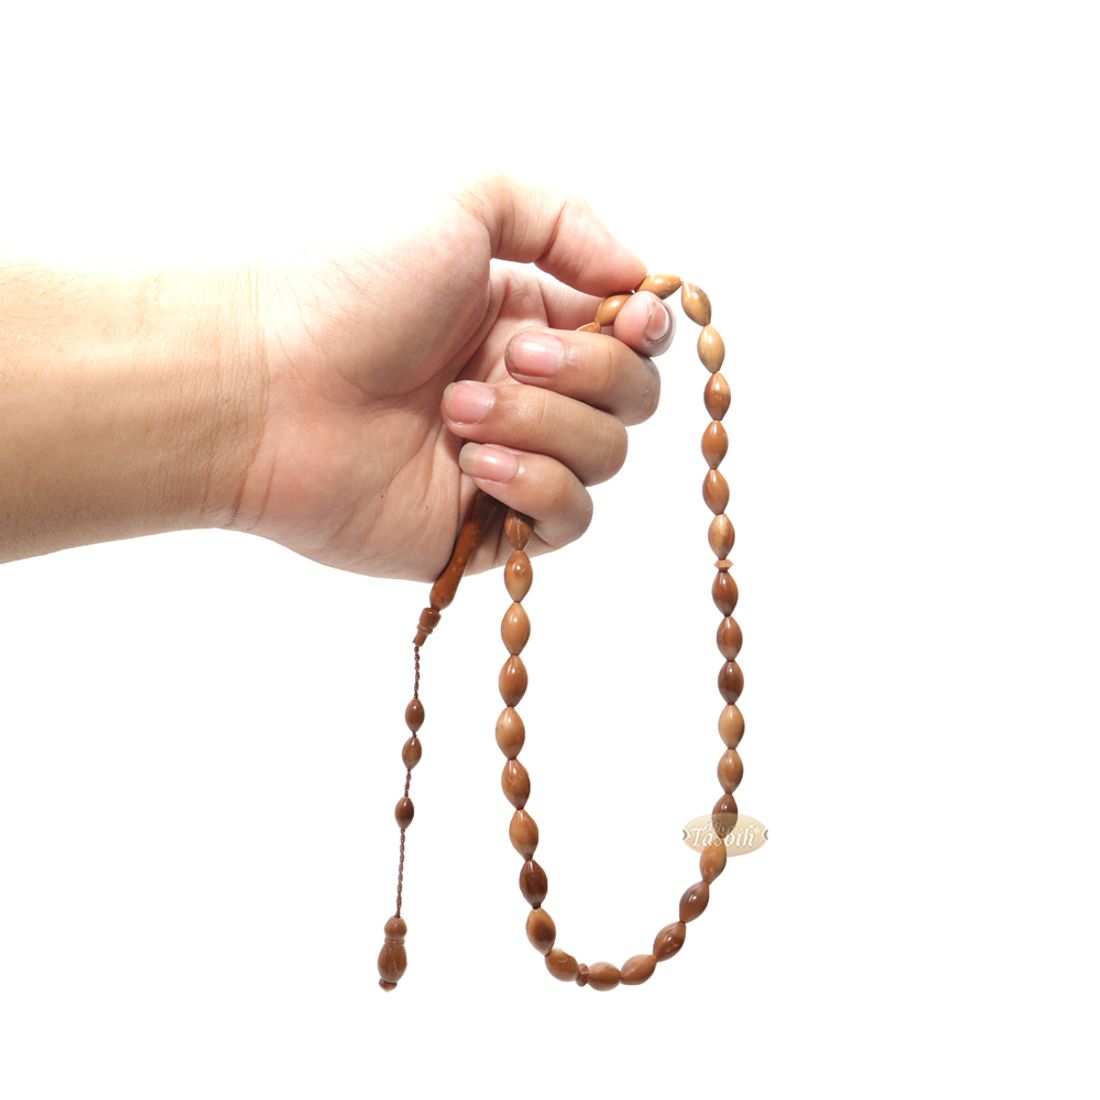 Genuine Kuka Tasbih – 8x10mm Small 33-bead Long Tapered Oval Shaped Natural Color